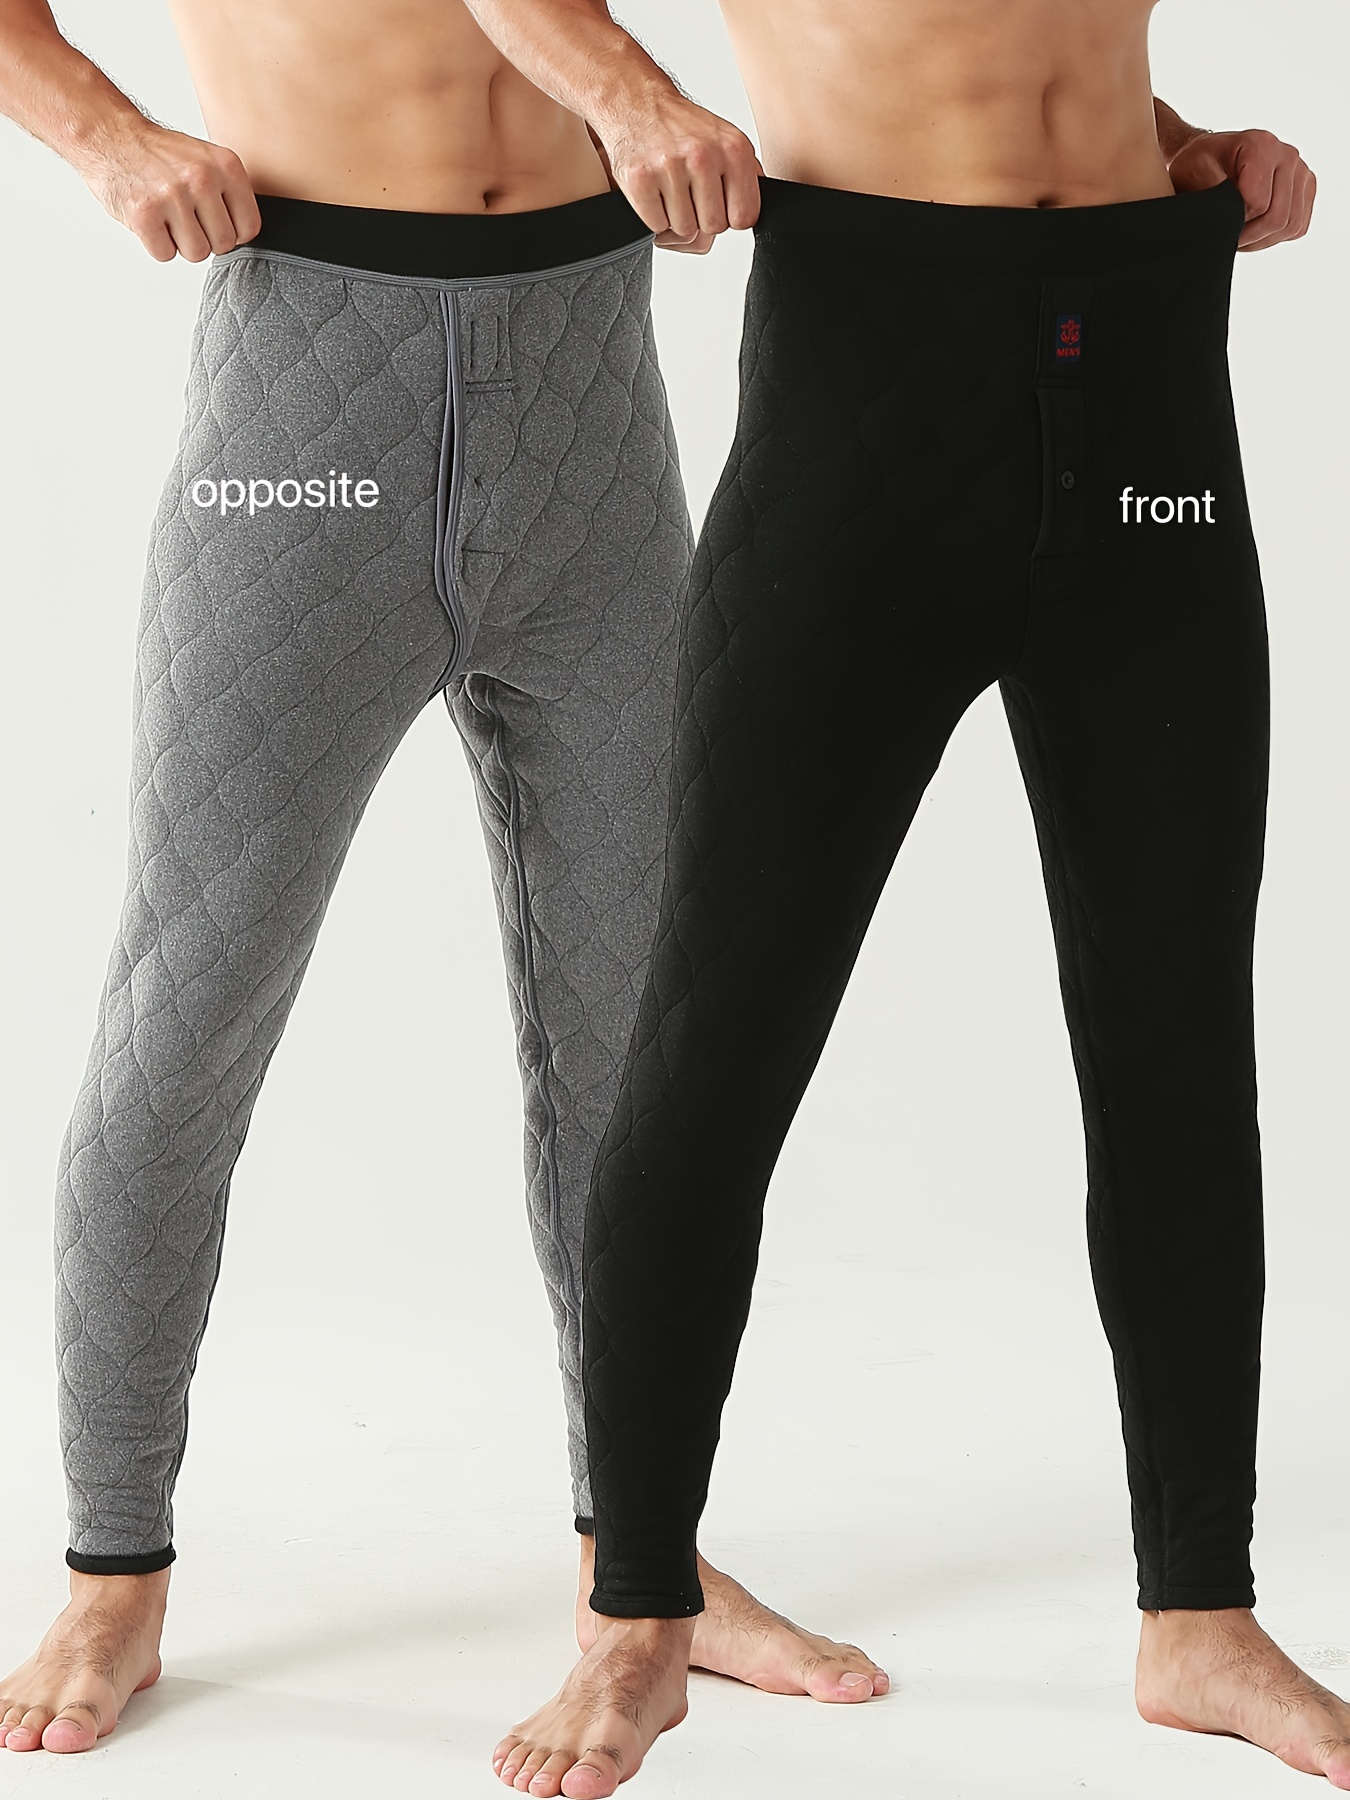 Men's Thermal Underwear Clothing Set, Warm Long Johns Pants Sport Suits For  Winter